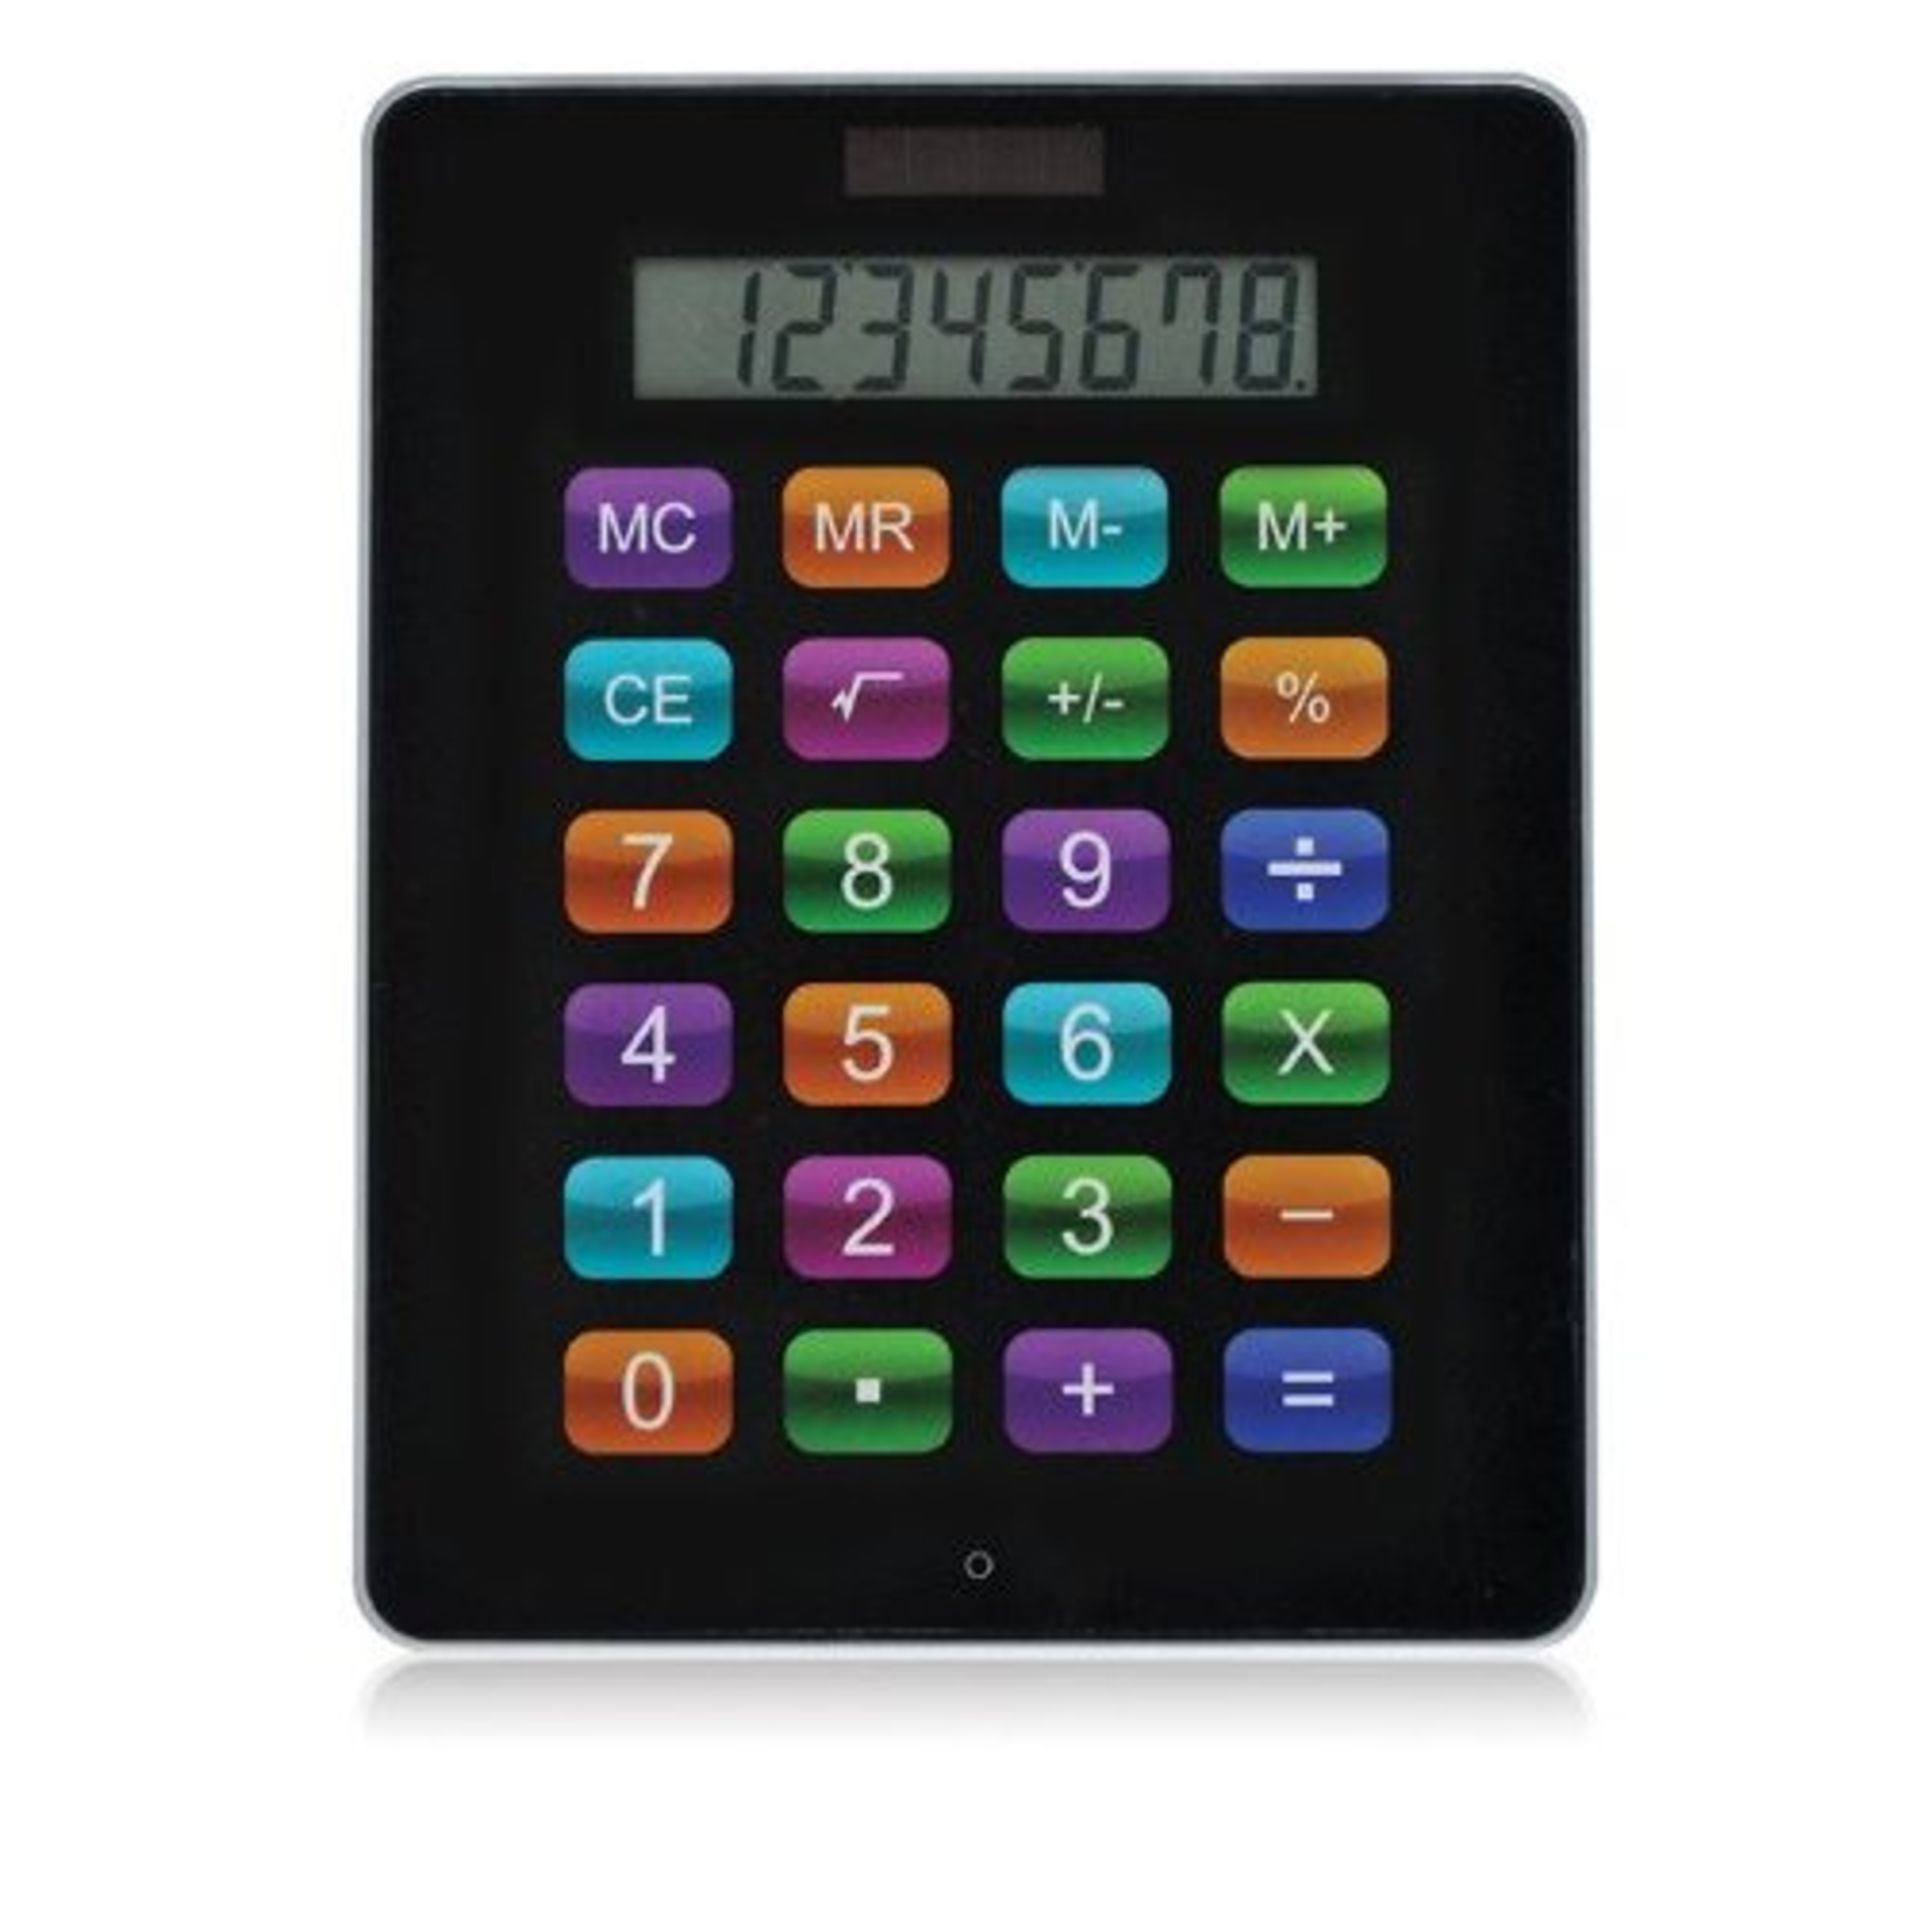 V *TRADE QTY* Brand New Ipad Calculator-Battery powered with solar backup X 24 YOUR BID PRICE TO